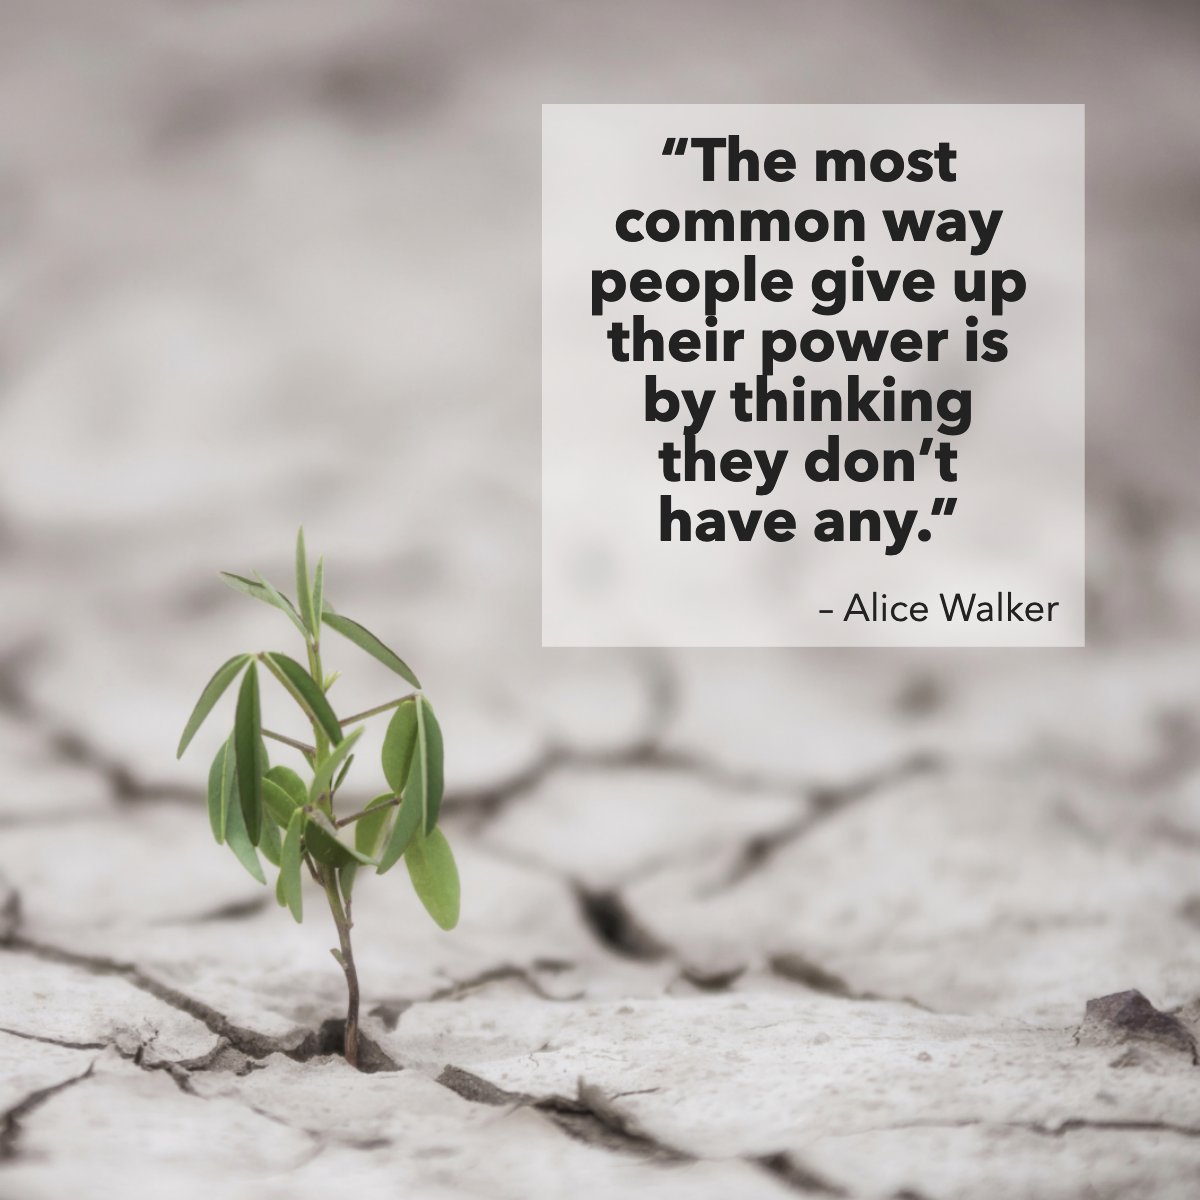 'The most common way people give up their power is by thinking they don’t have any.' 
— Alice Walker 👌

#wisdomquote #wisdomoftheday #quotegram #quoteoftheday #powerquote
 #lakelivingpa #lakelife #lakewallenpaupack #realestate #poconos #karenricerealtor